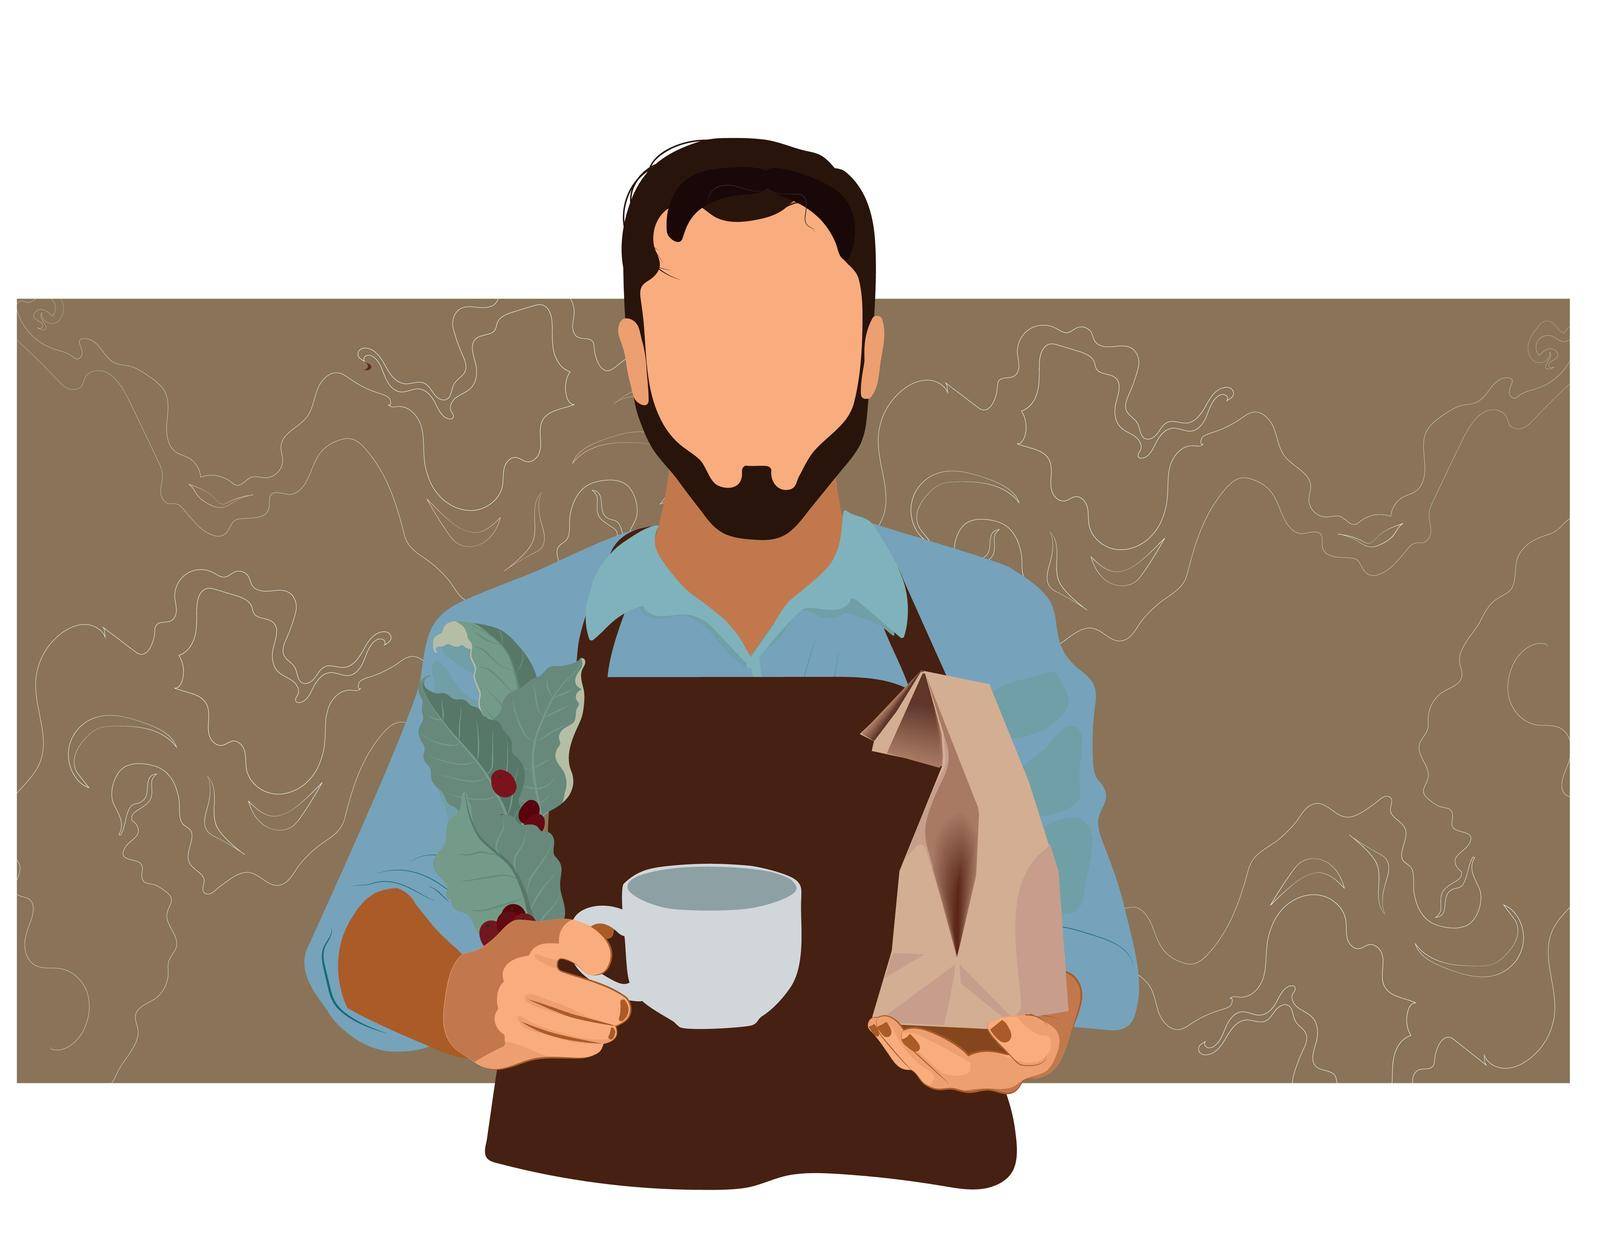 Coffee Business Concept - Male barista making coffee and serving a paper cup of hot coffee in cafe. Hand drawn in thin line style, vector illustrations. Vector illustration